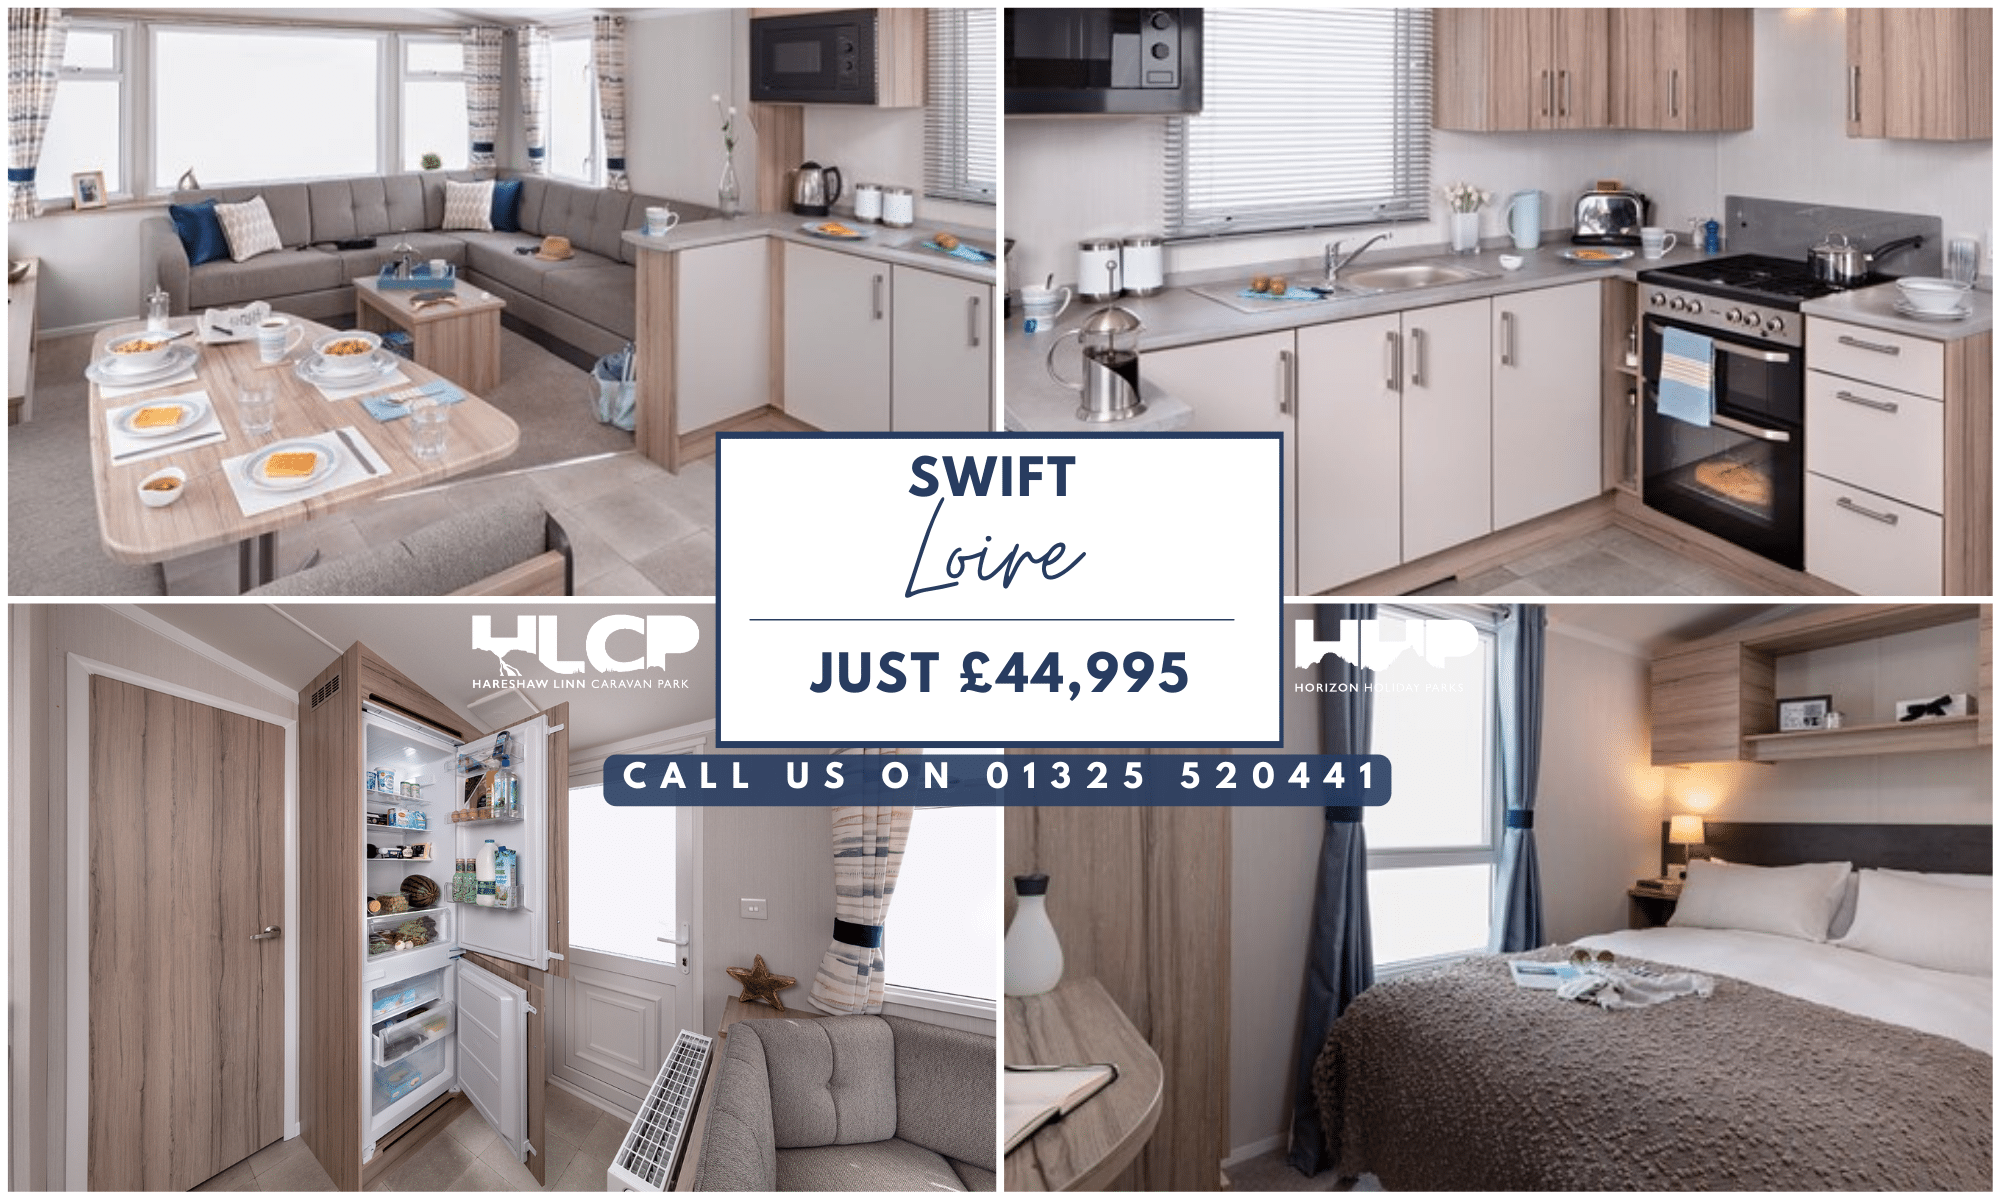 Preview of the first image of swift-loire-35-x-12-2-bed-44995.